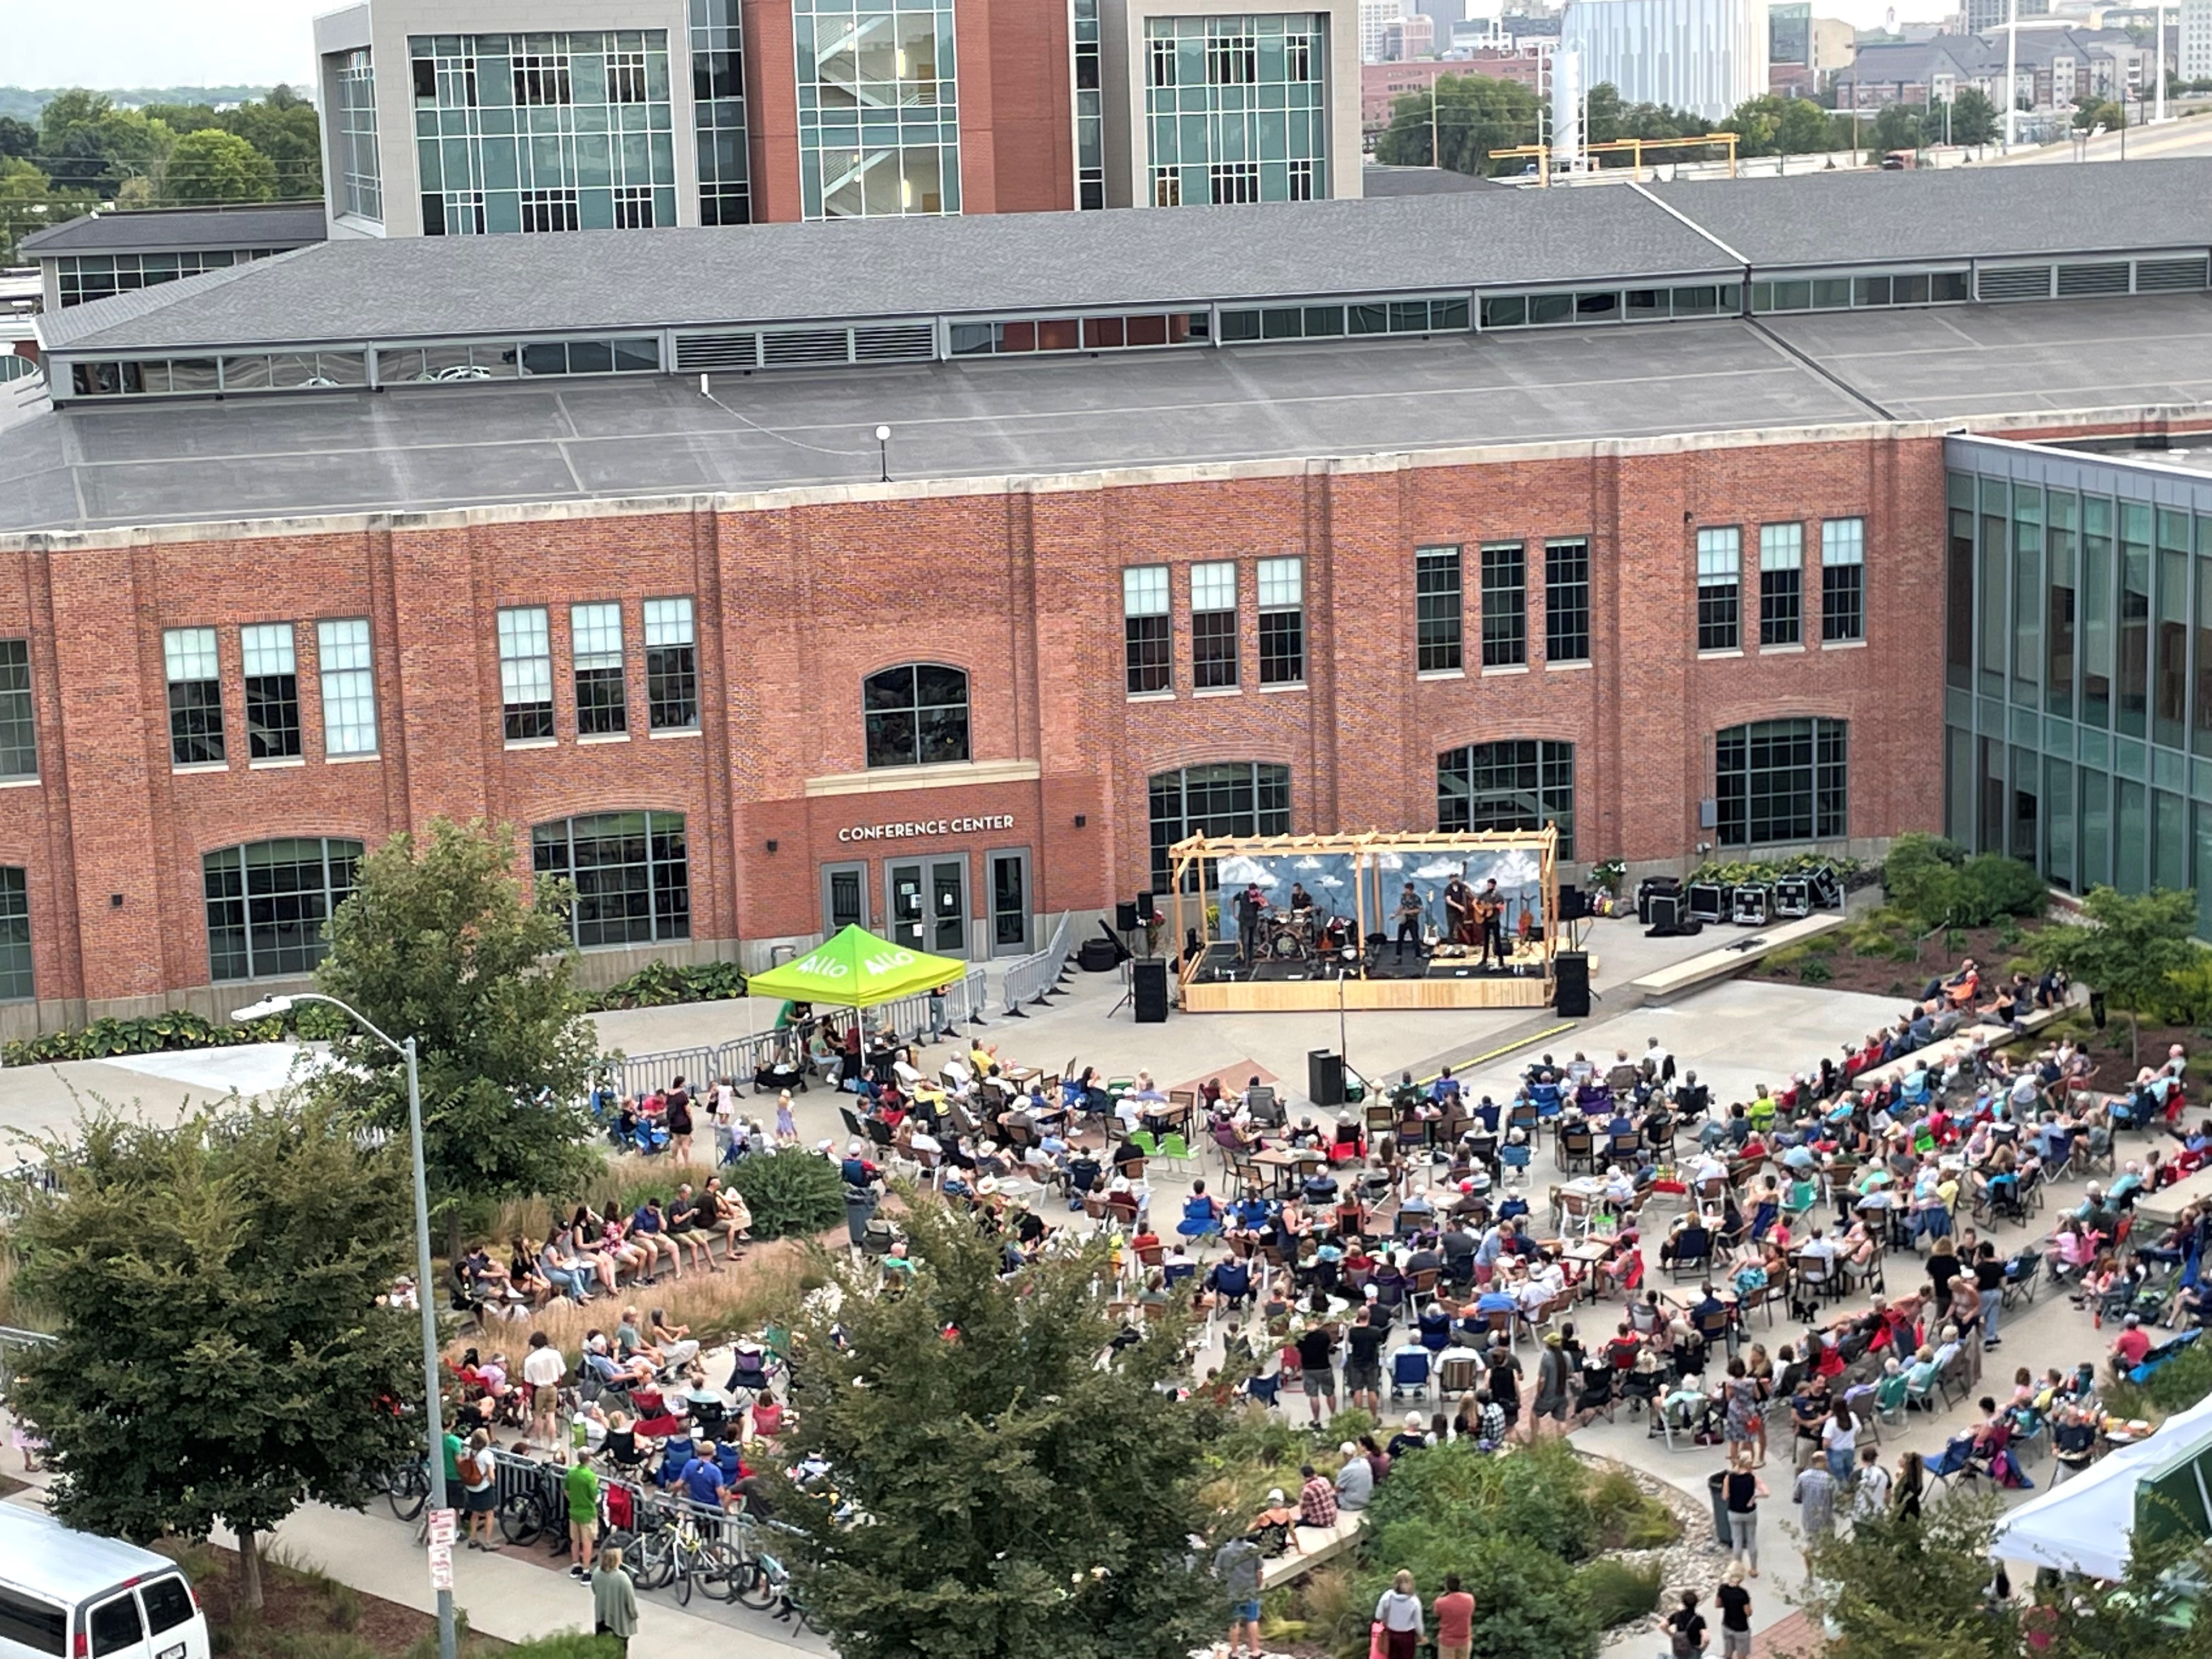 Nebraska Bluegrass Concert attendees enjoy a performance by The Steel Wheels in the NIC Plaza.